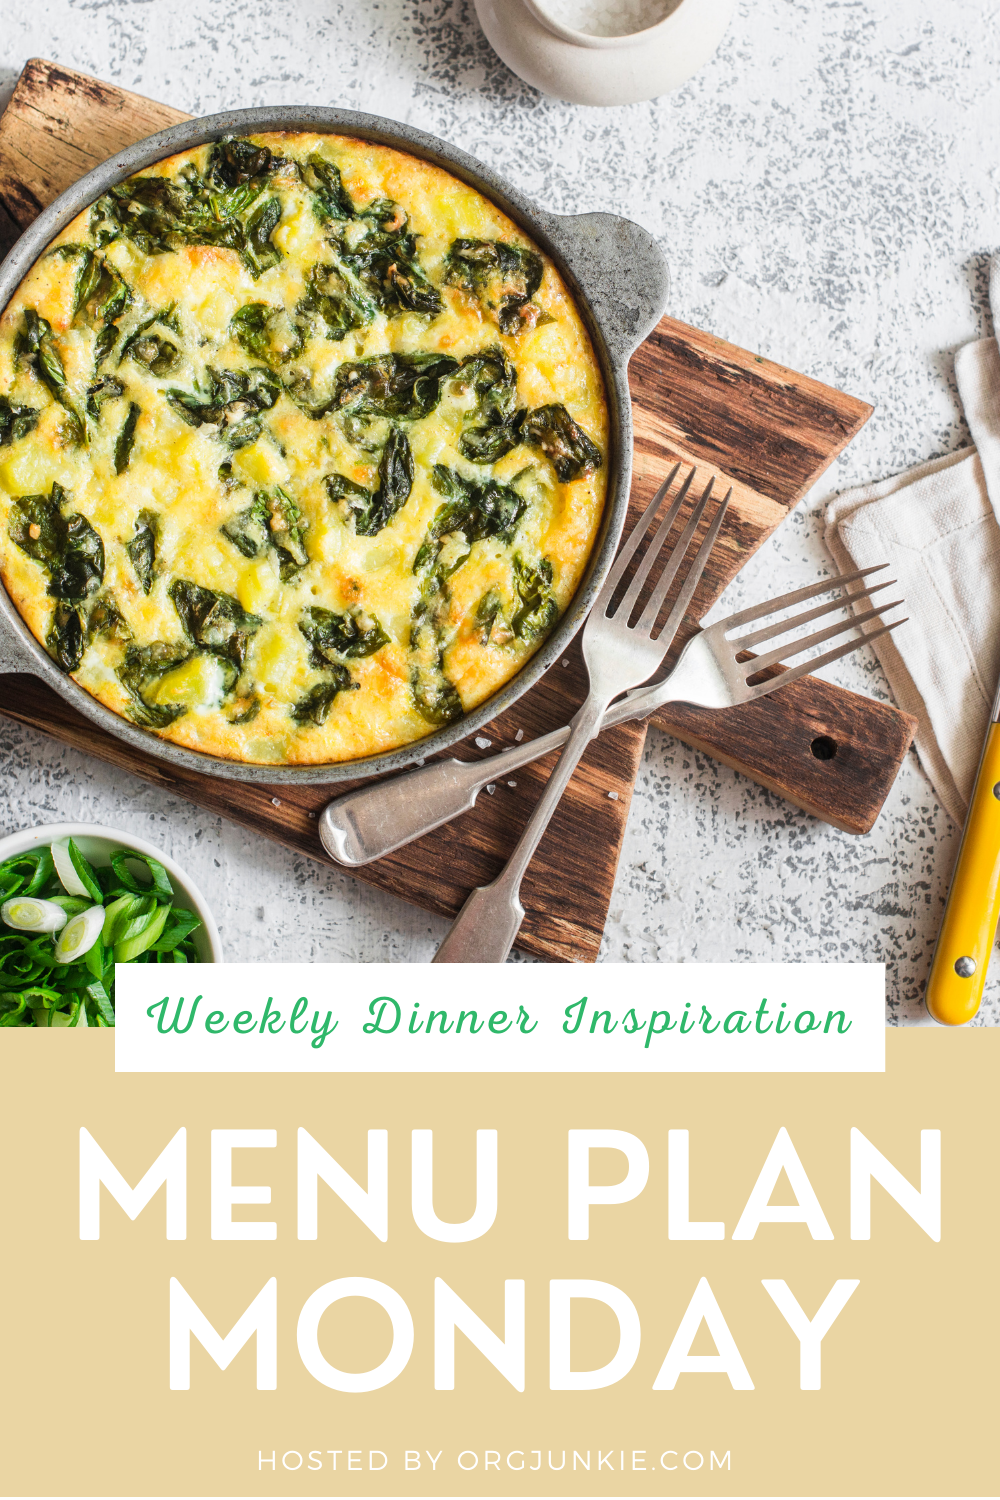 Menu Plan Monday for the week of March 22/21. Weekly Dinner Inspiration at I'm an Organizing Junkie